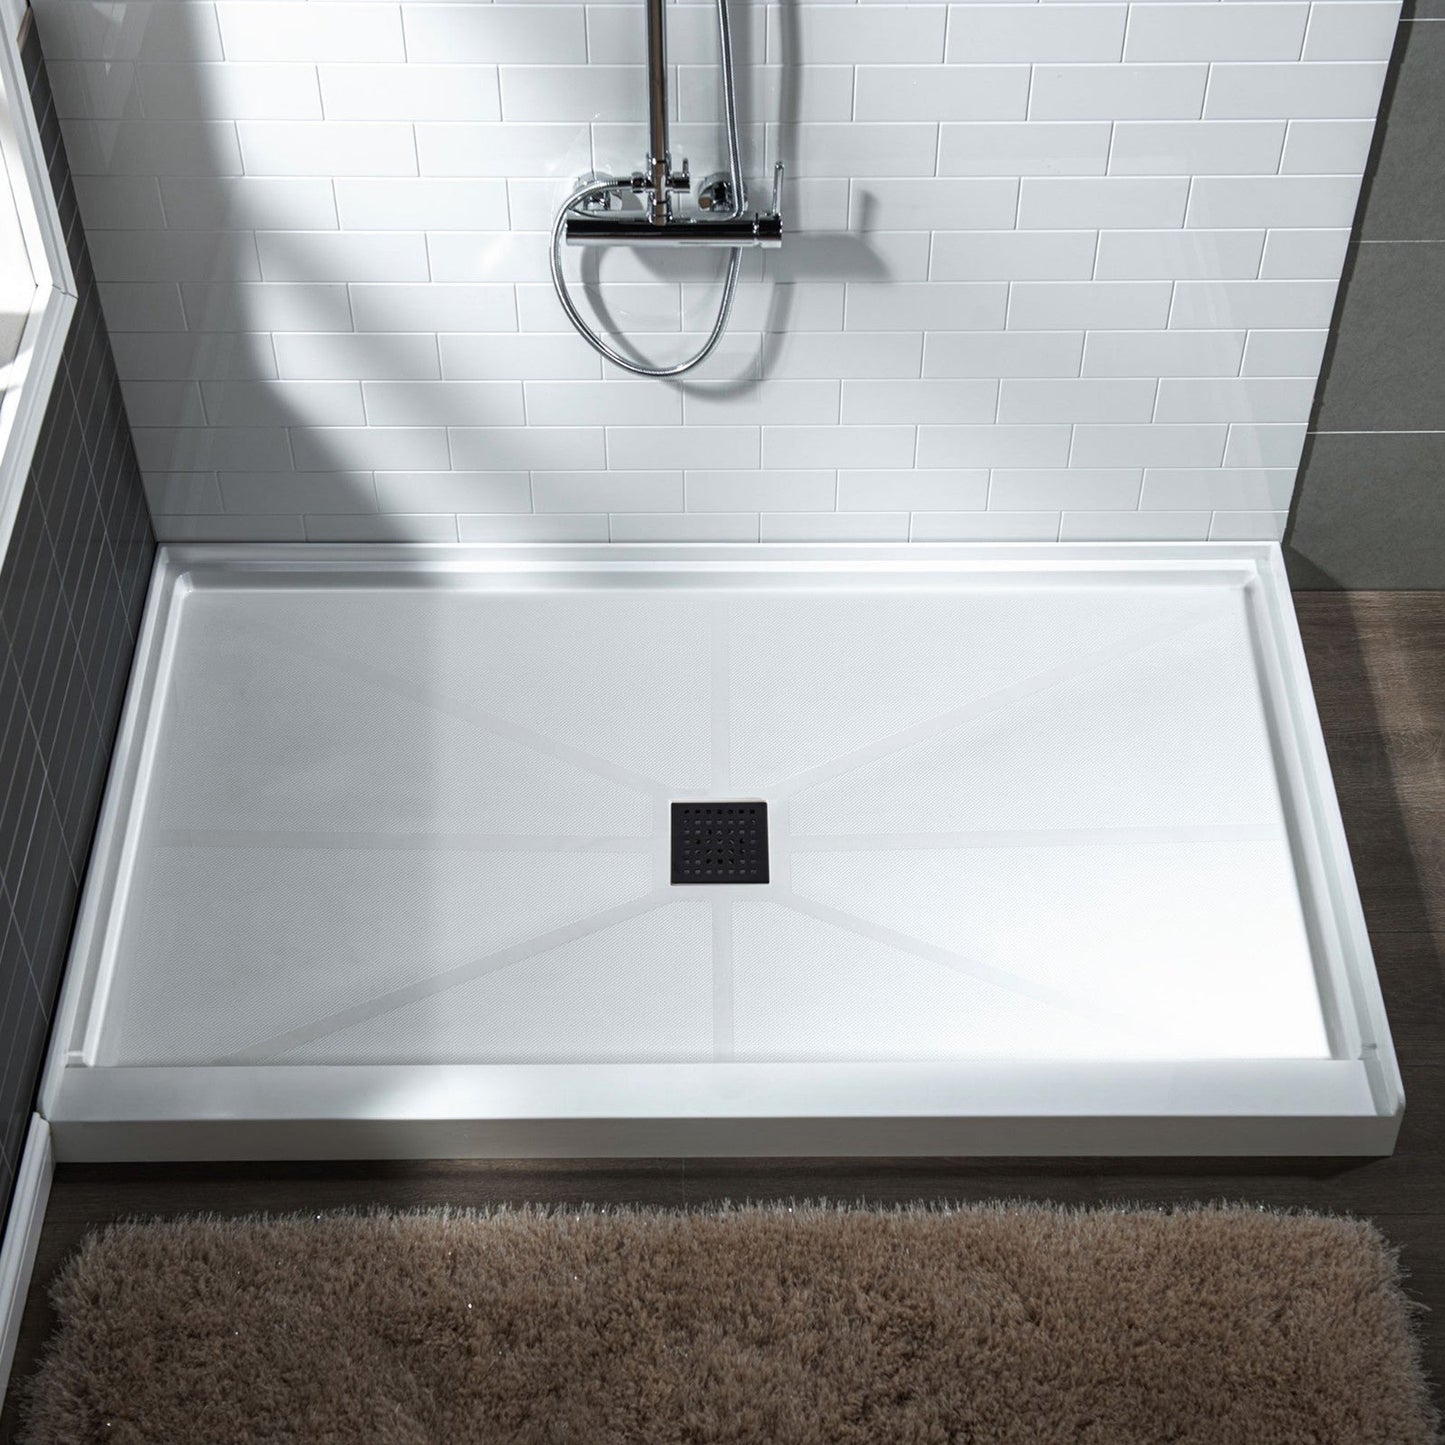 WoodBridge 60" x 36" White Solid Surface Shower Base Center Drain Location With Matte Black Trench Drain Cover